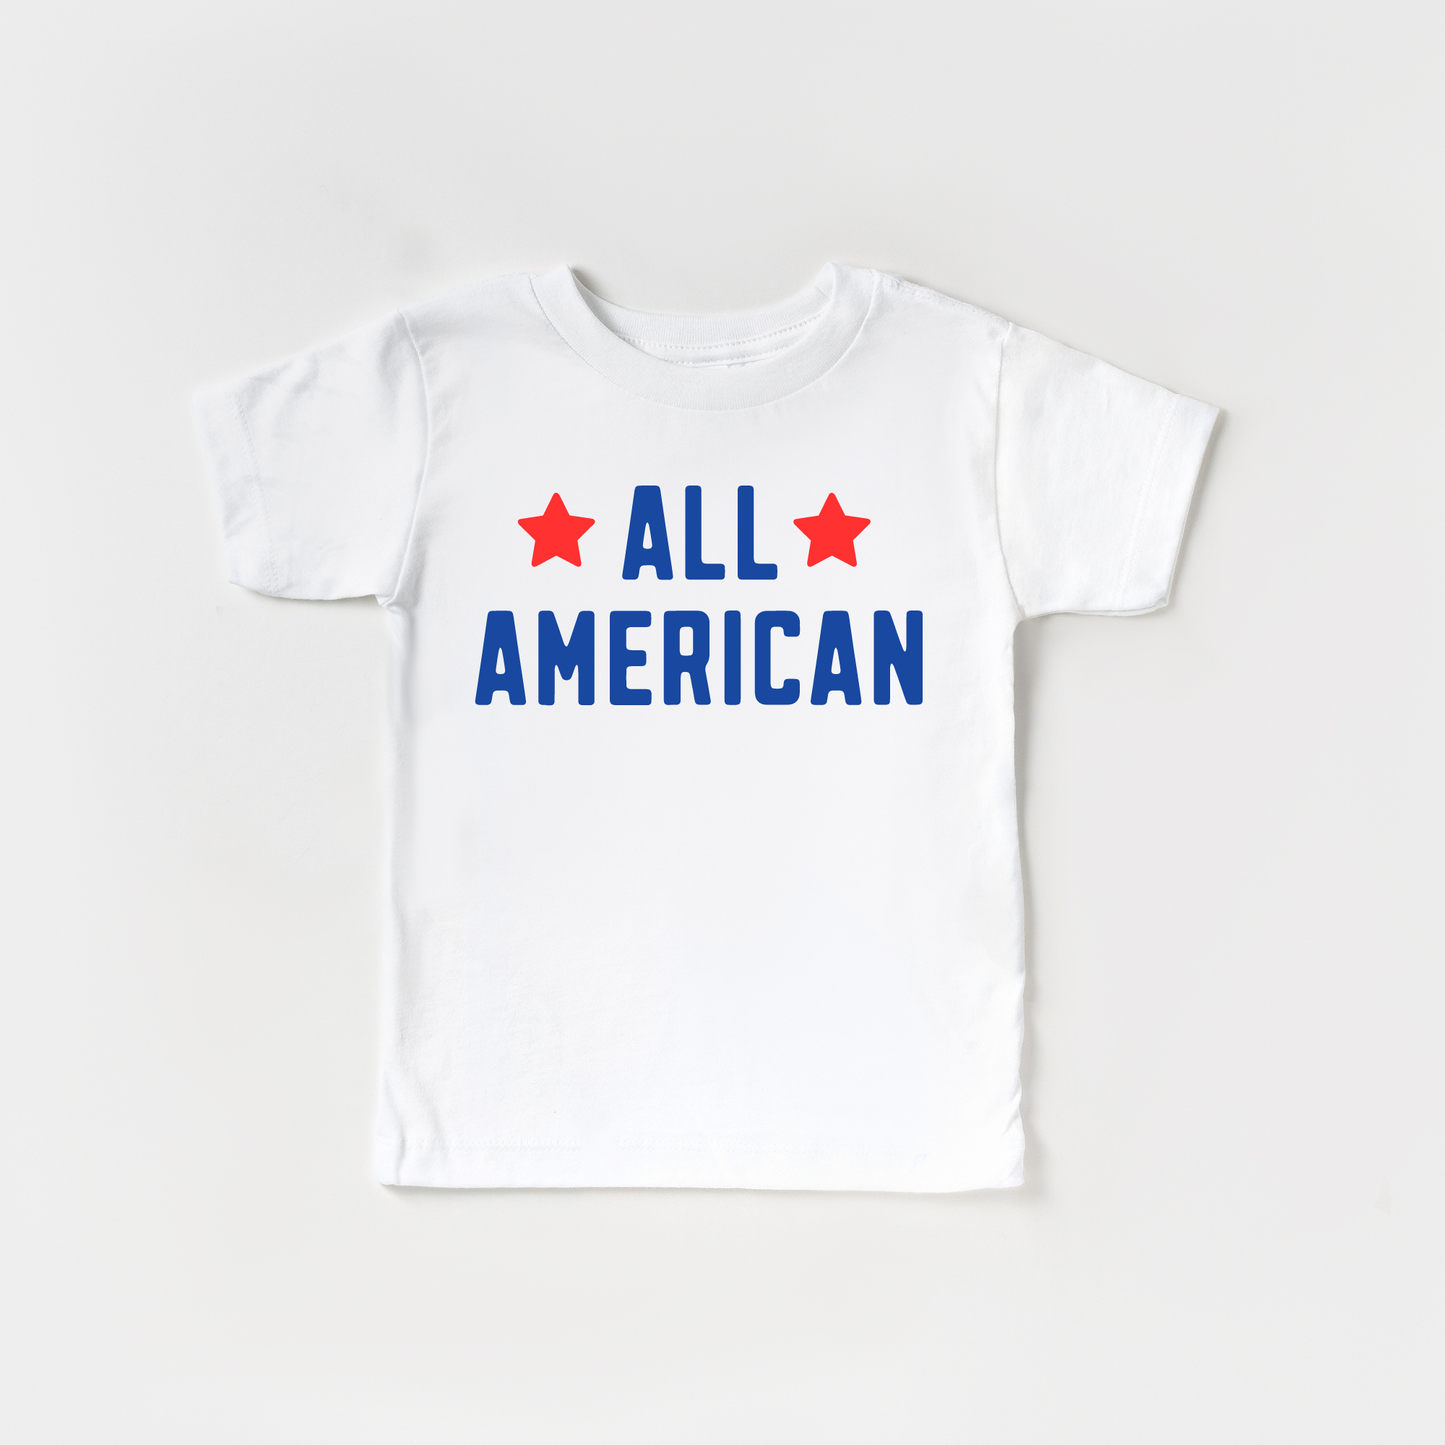 All American Toddler T-Shirt